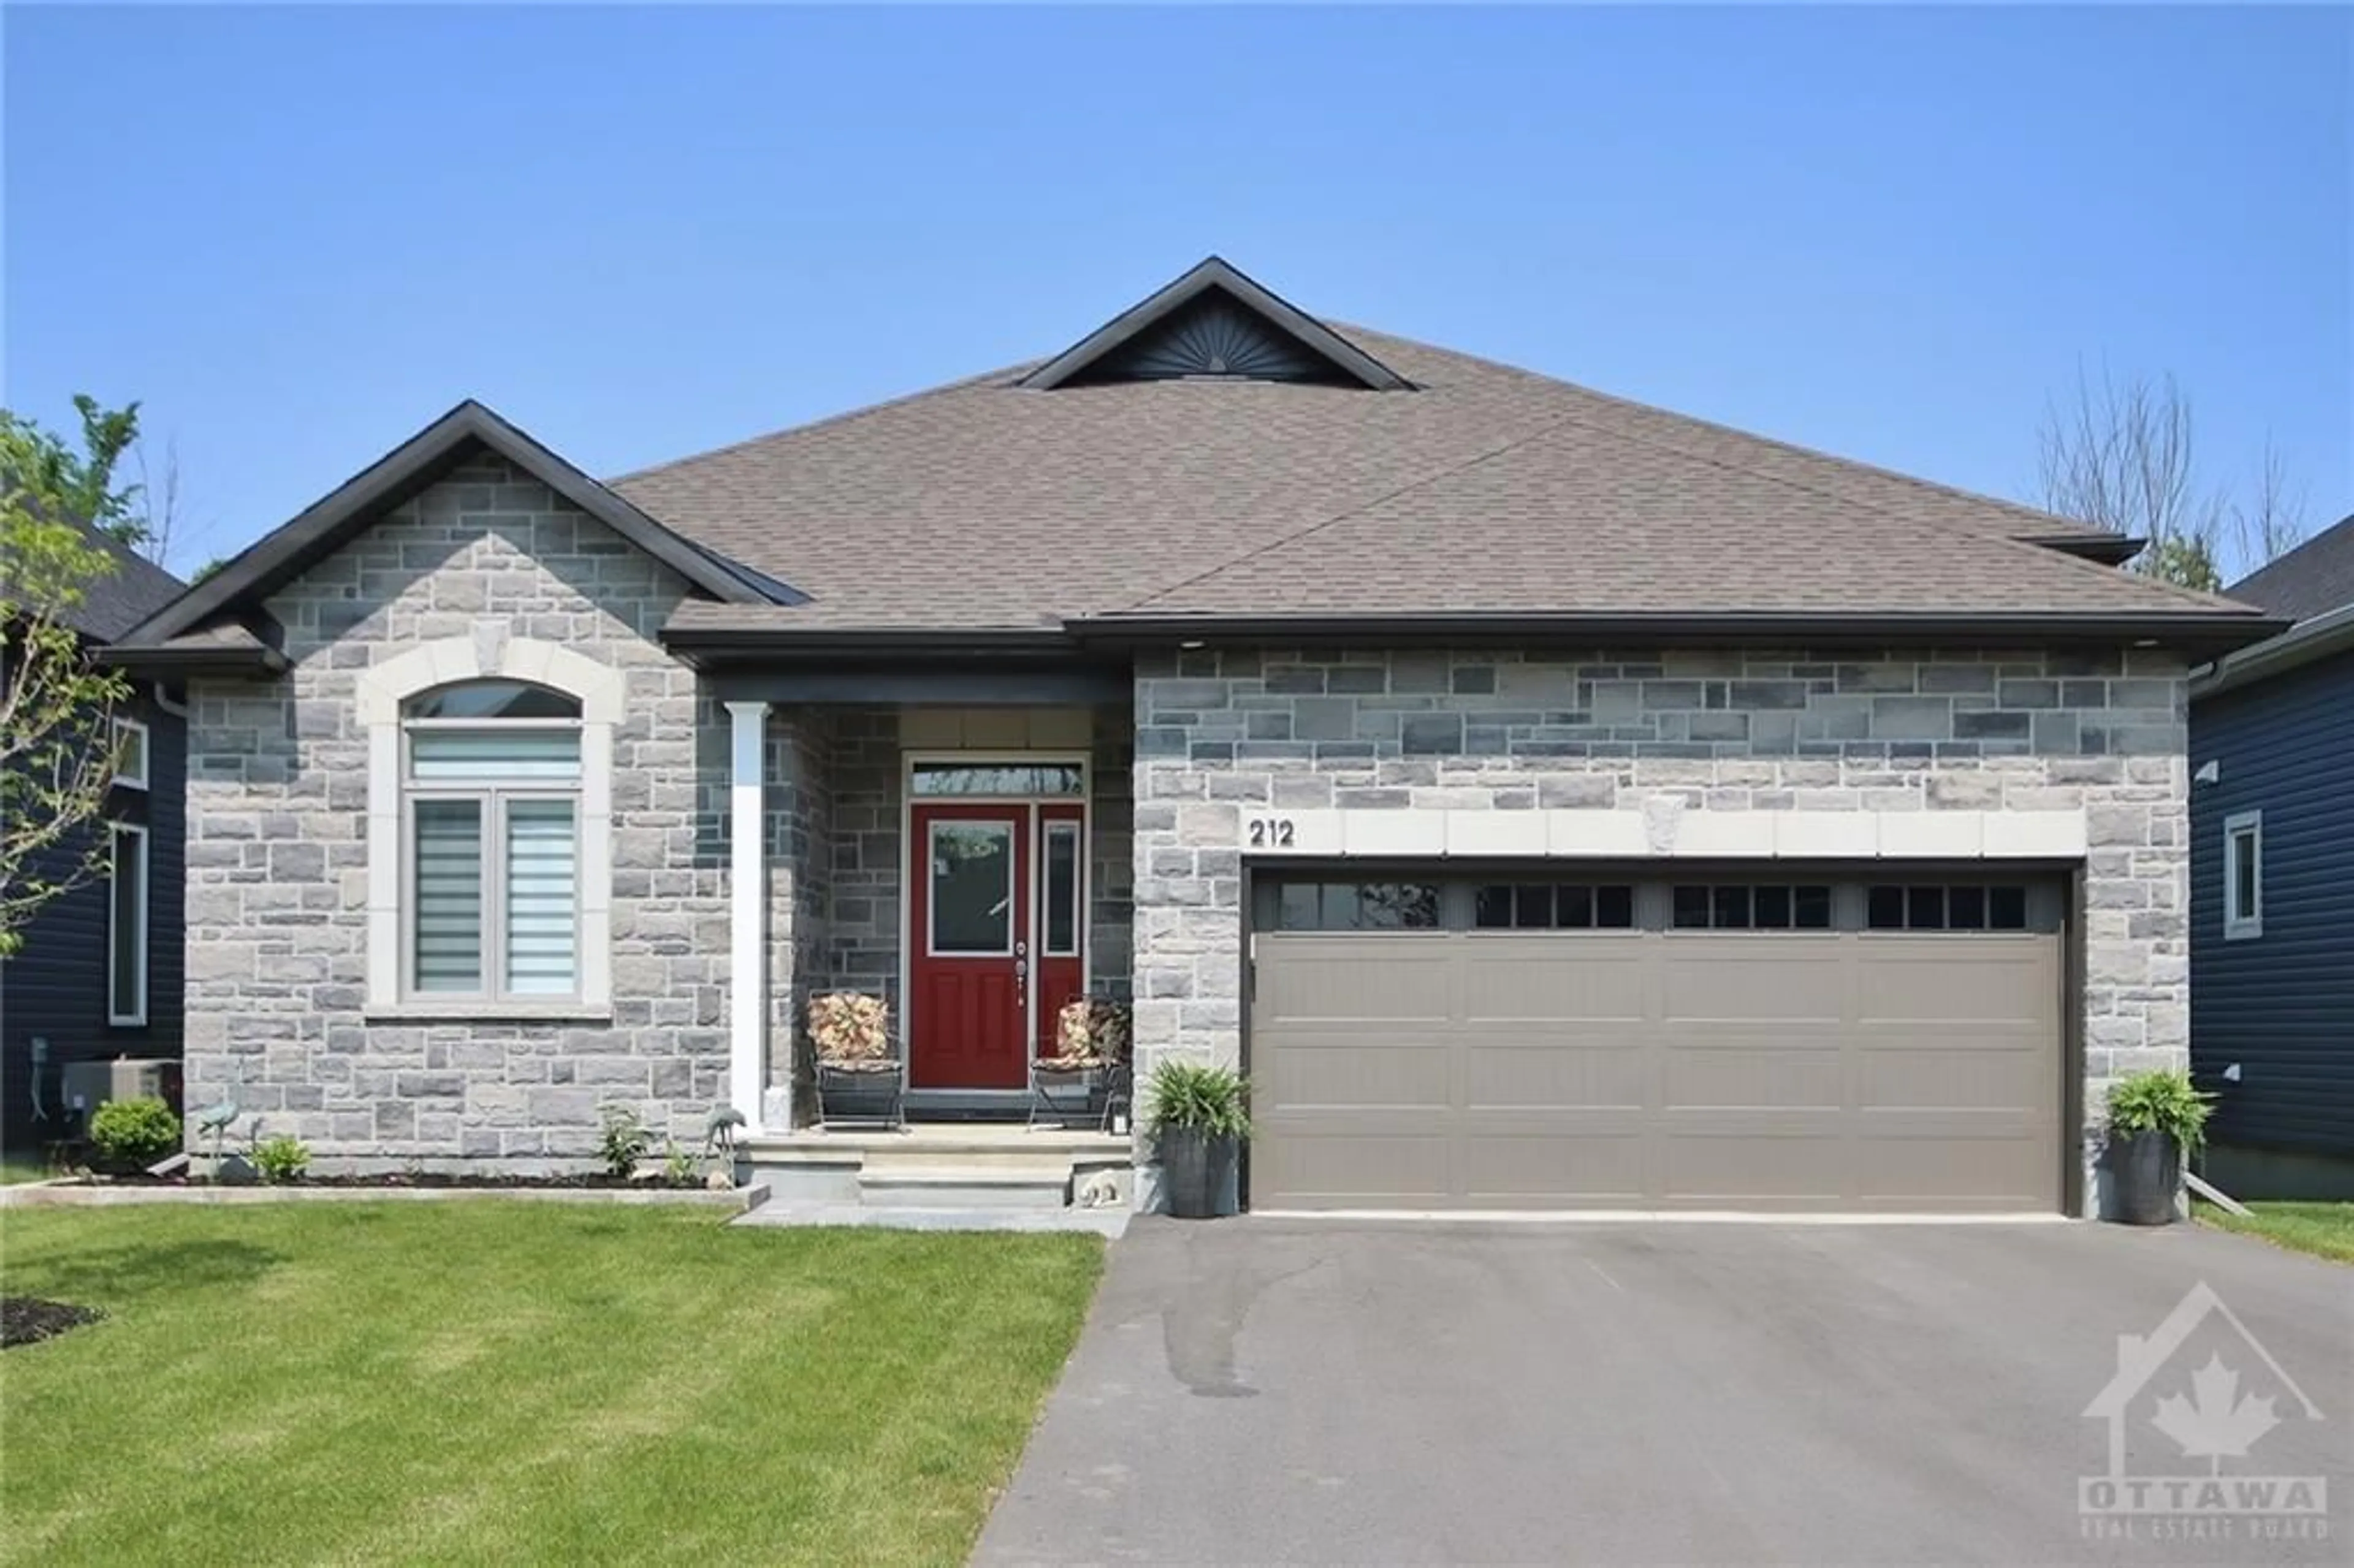 Home with stone exterior material for 212 BLACKHORSE Dr, Kemptville Ontario K0G 1J0